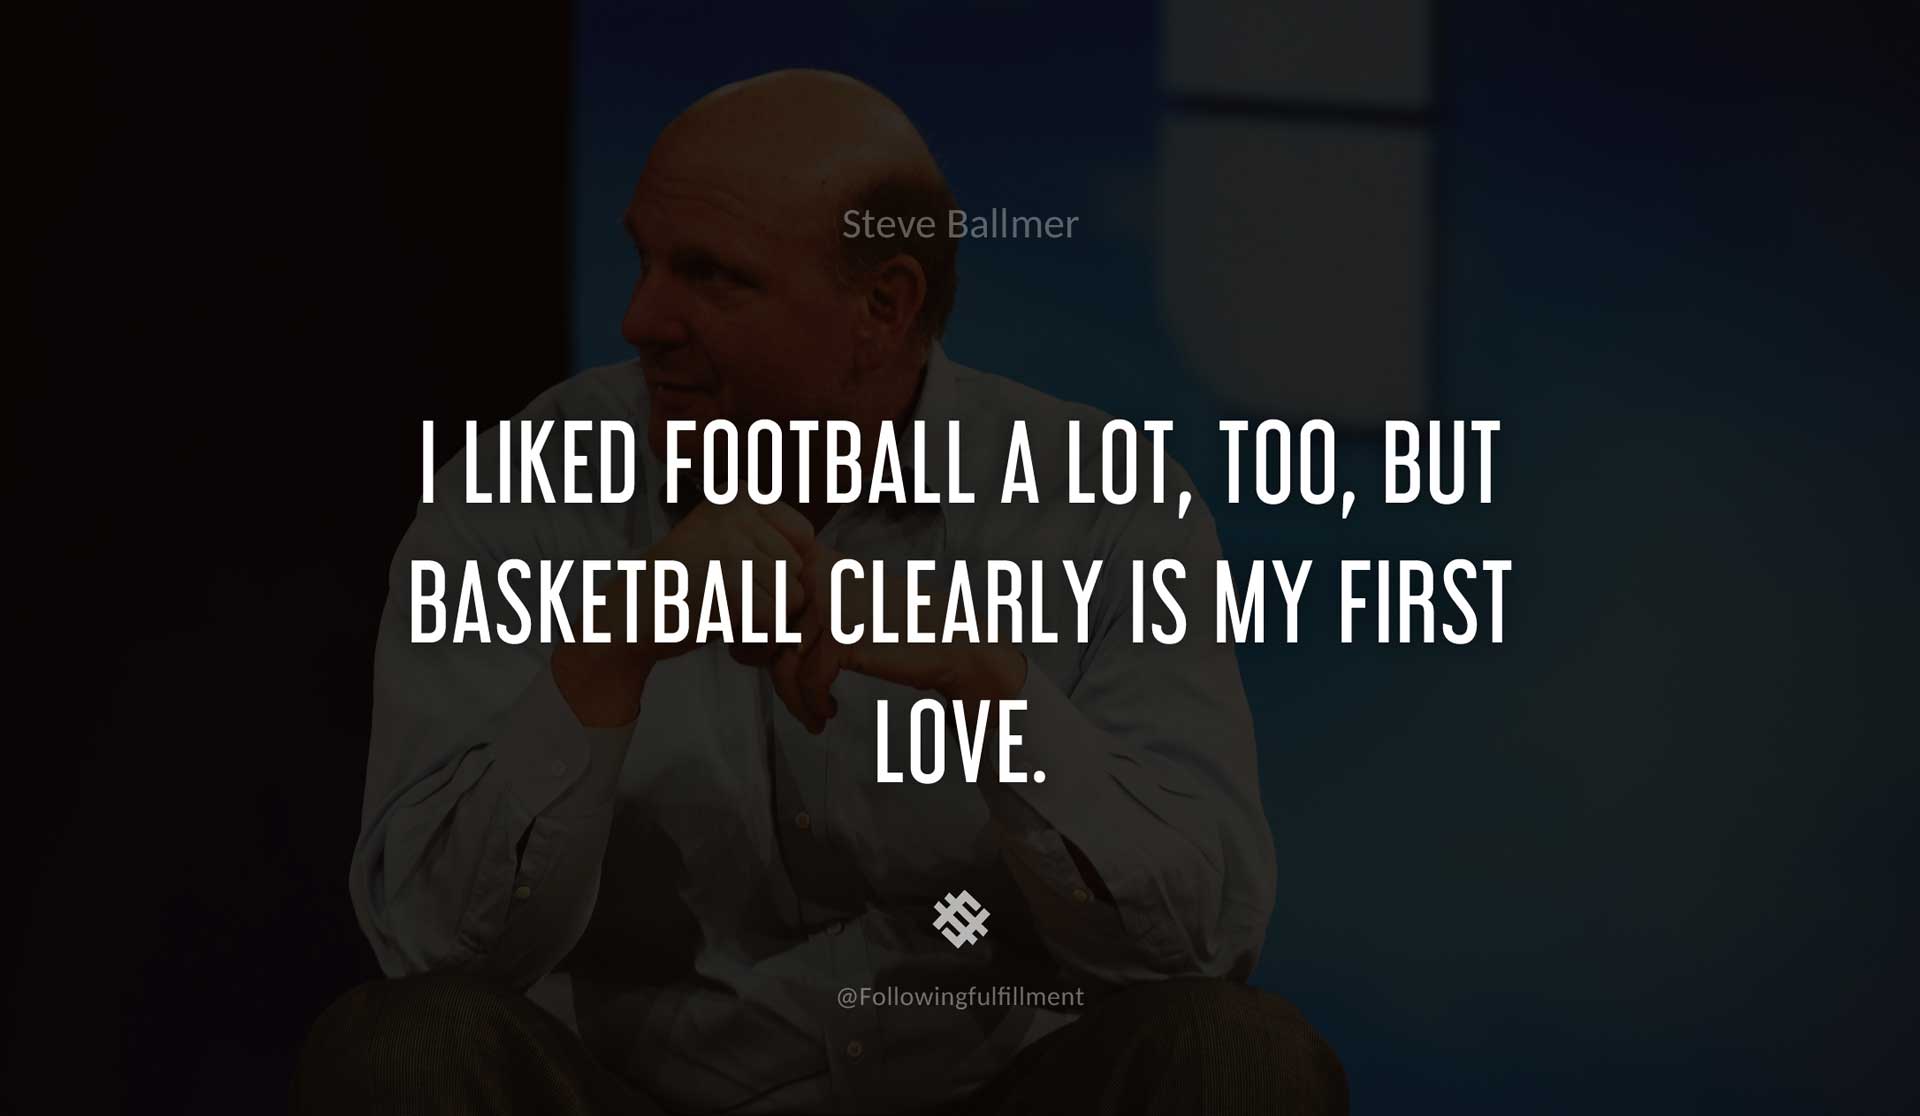 I-liked-football-a-lot,-too,-but-basketball-clearly-is-my-first-love.-STEVE-BALLMER-Quote.jpg